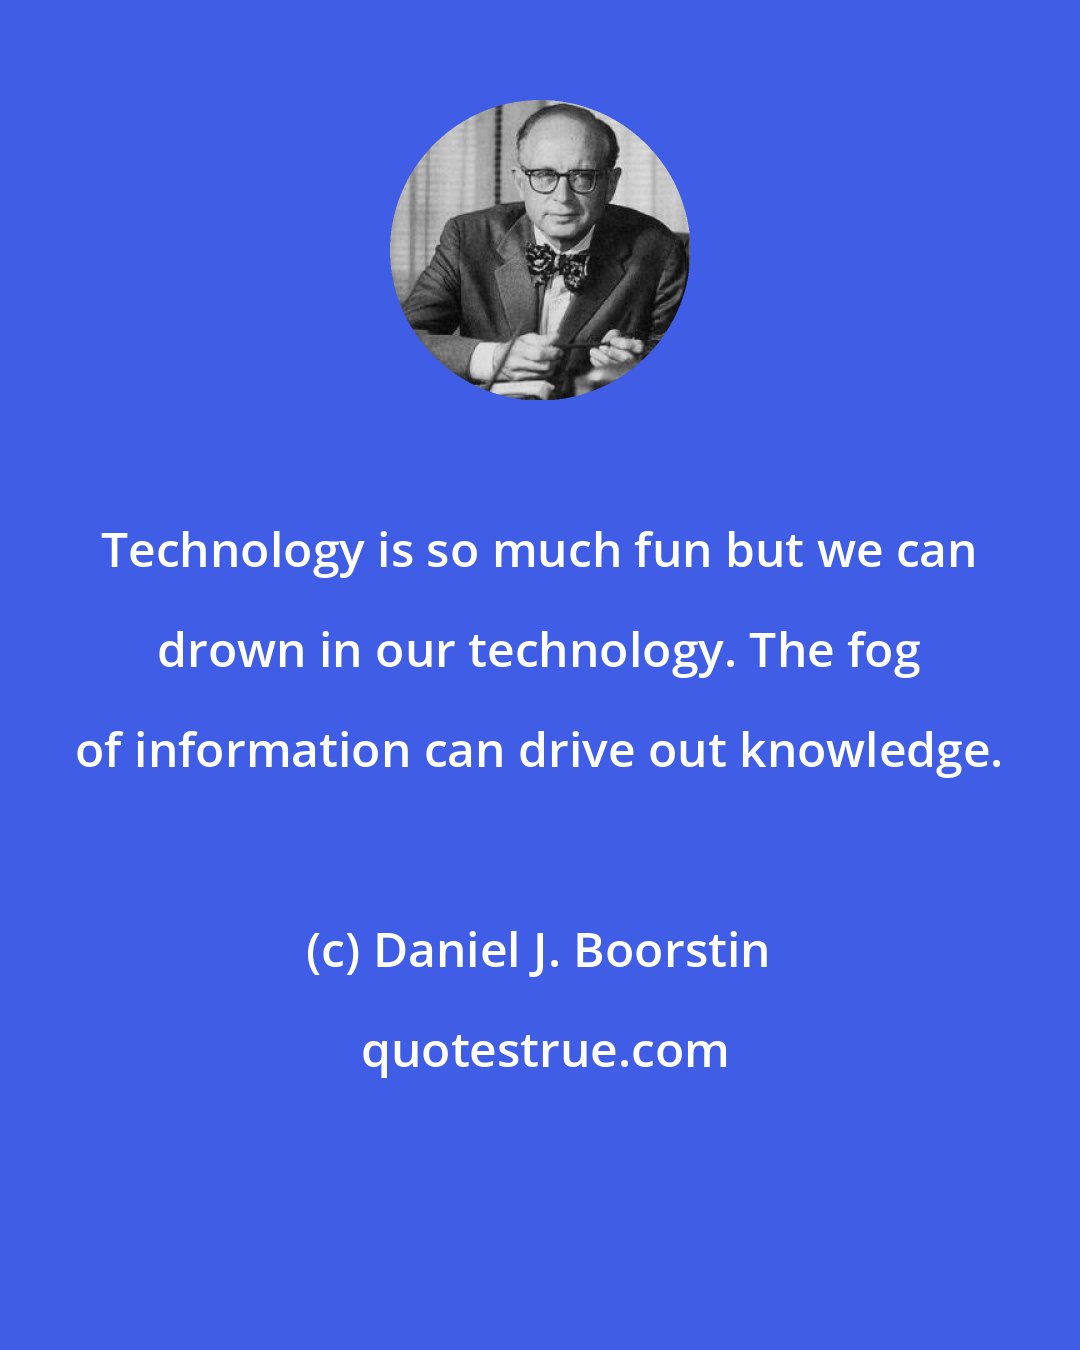 Daniel J. Boorstin: Technology is so much fun but we can drown in our technology. The fog of information can drive out knowledge.